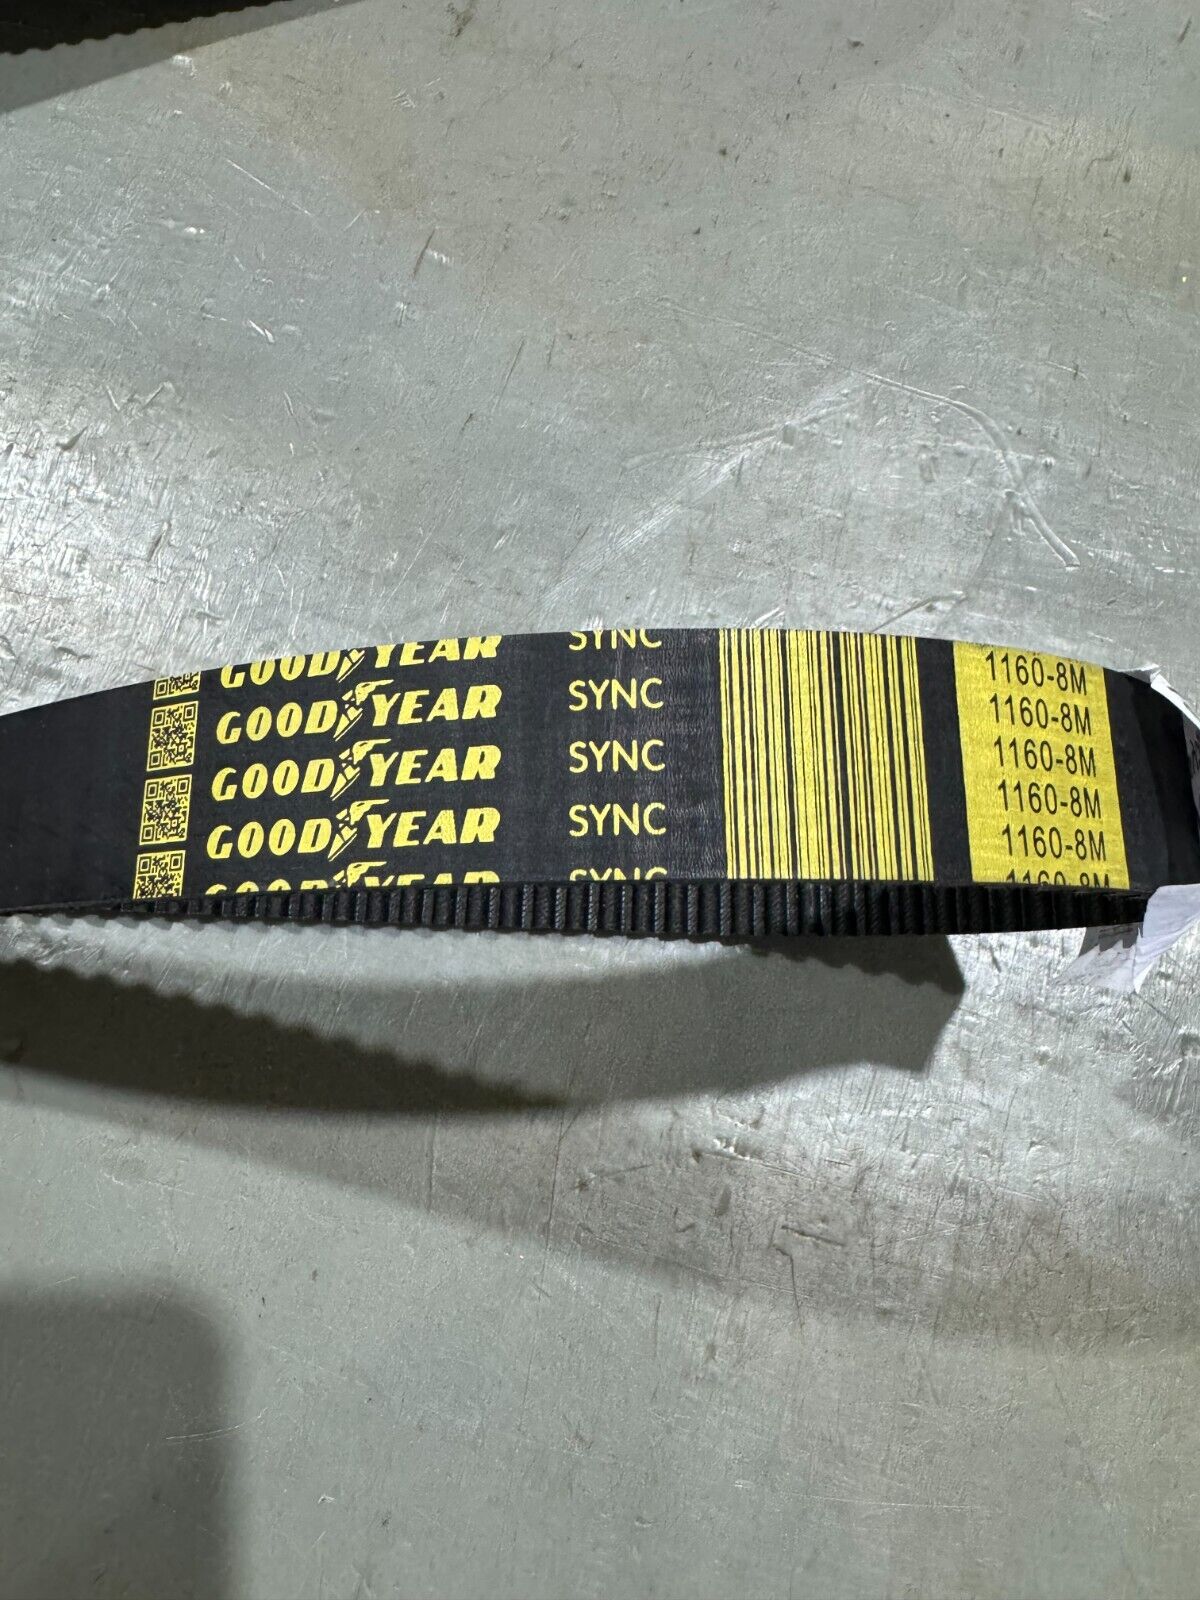 FACTORY NEW GOODYEAR SYNCHRONOUS Sync HTD TIMING BELT 1160-8M-30